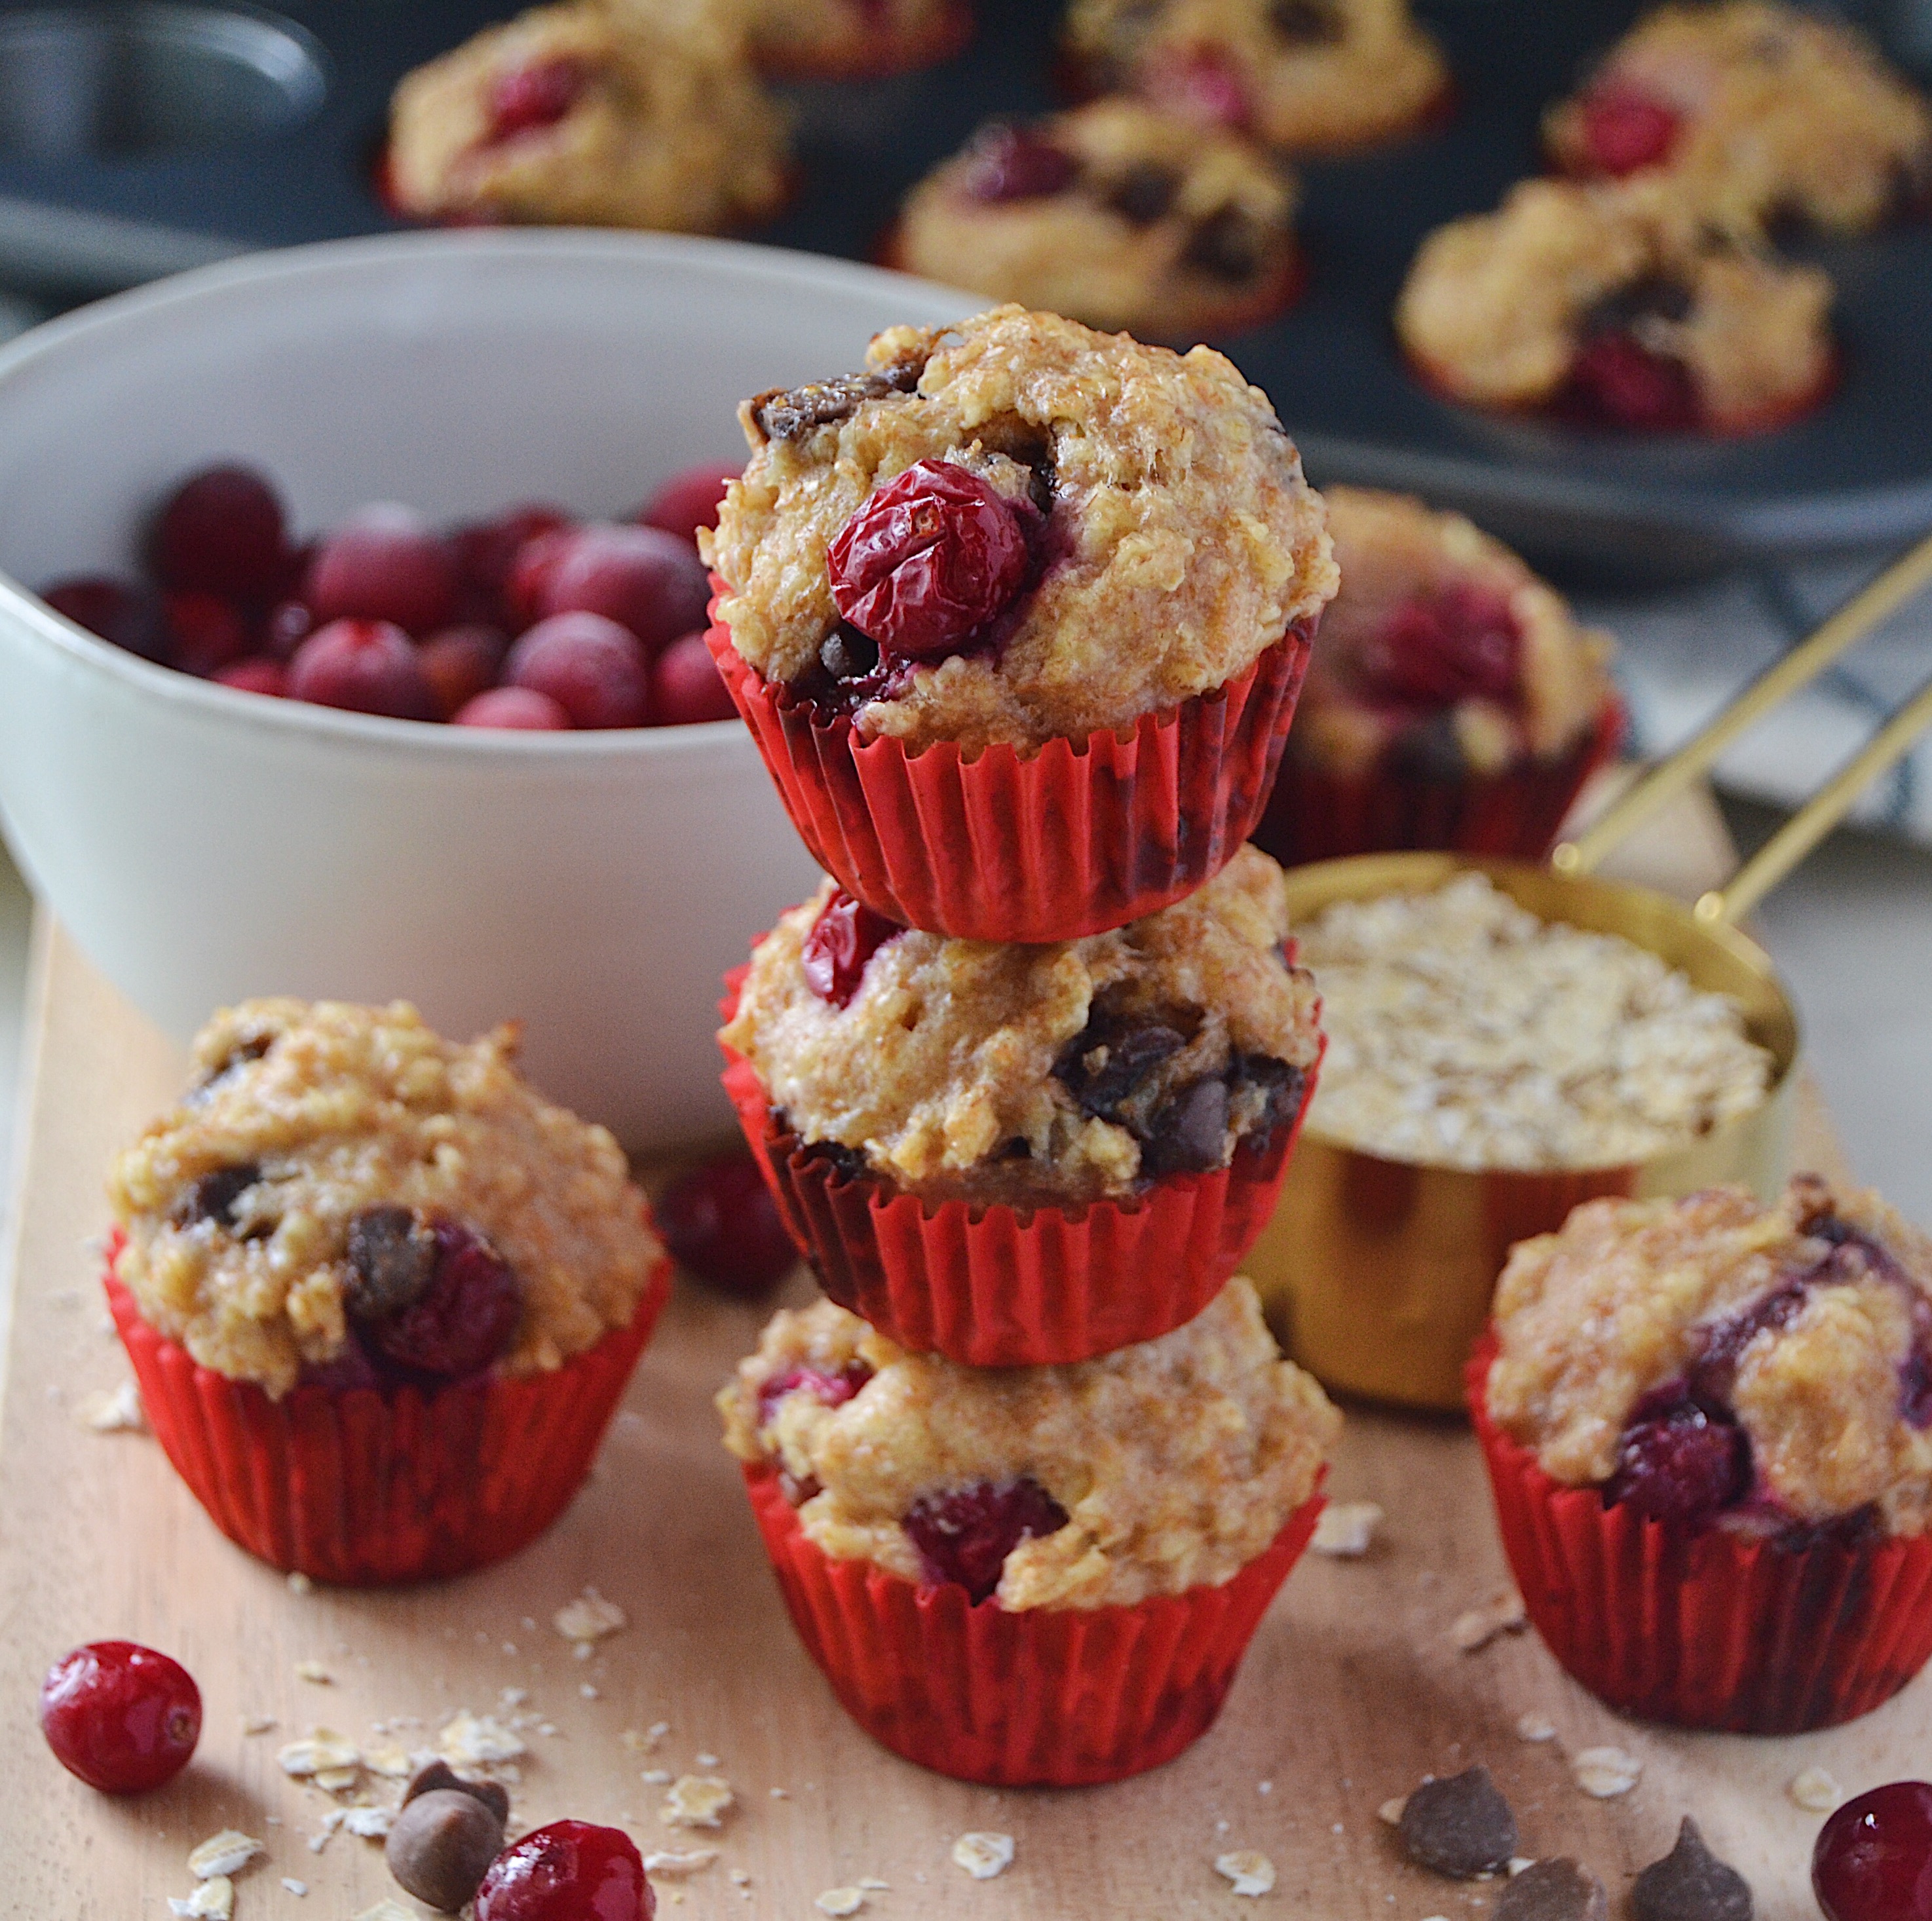 Cranberry Carob Chip Oatmeal Muffin Pupcakes recipe for the dog you love to spoil